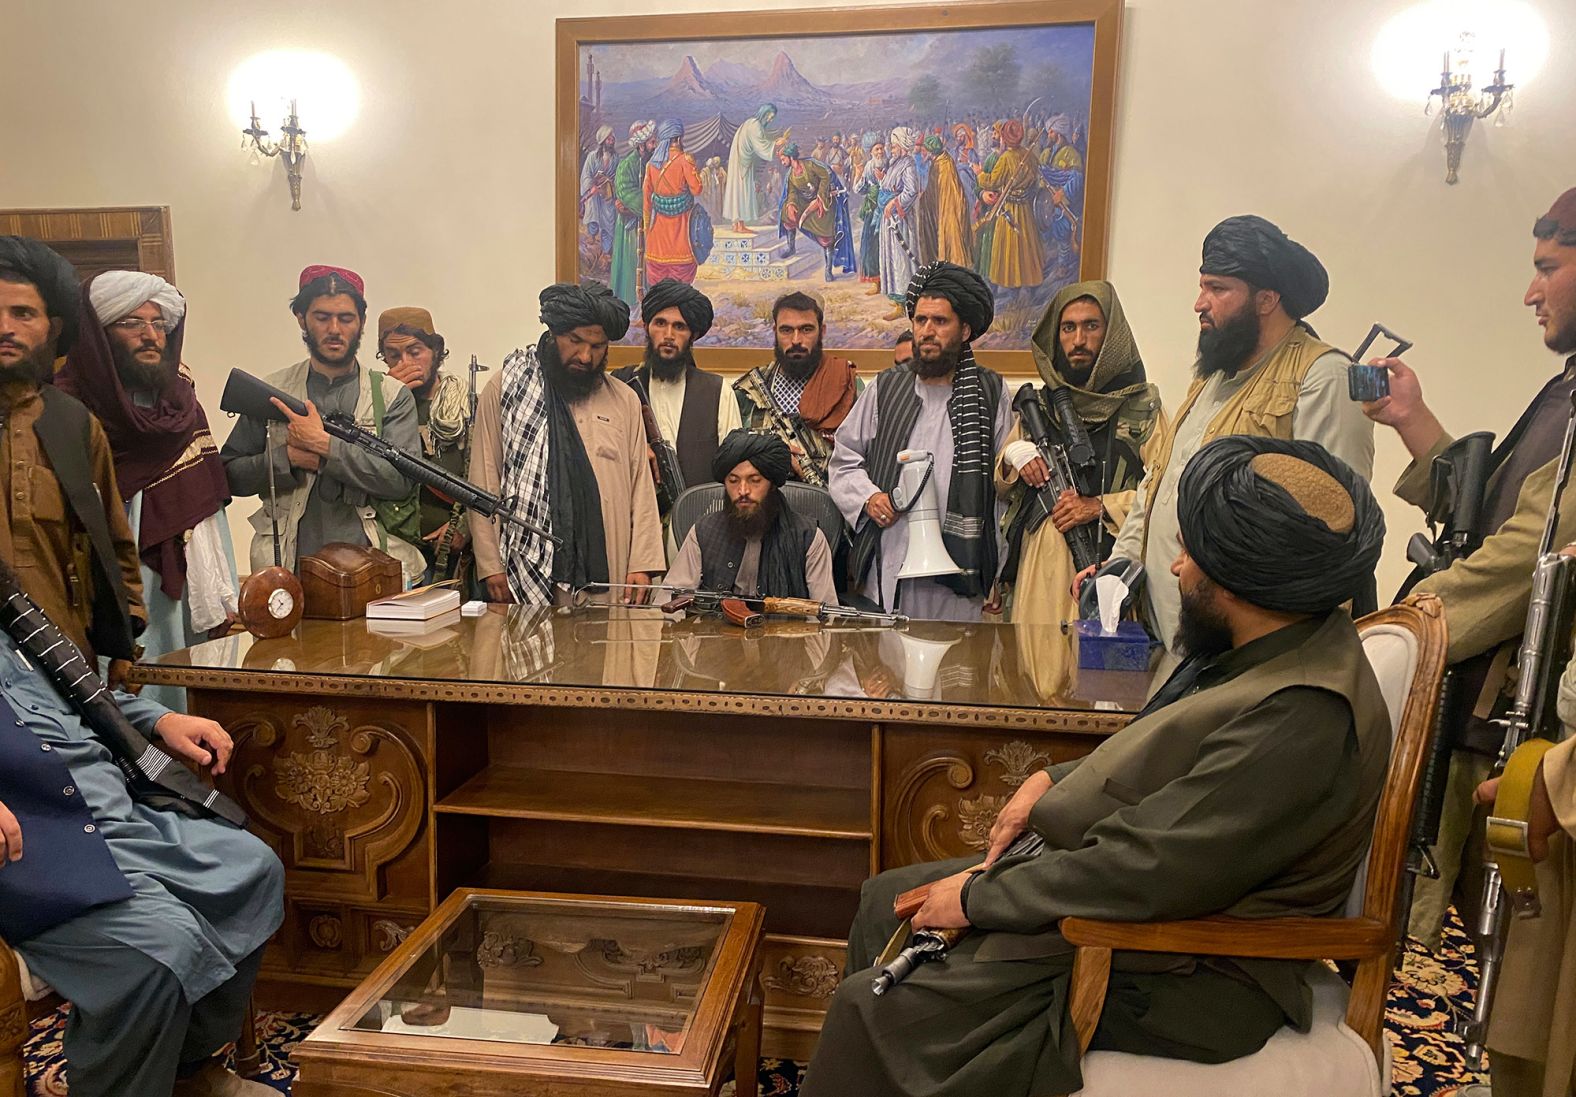 Taliban fighters sit inside the presidential palace in Kabul in August 2021. The palace was <a href="index.php?page=&url=https%3A%2F%2Fwww.cnn.com%2F2021%2F08%2F15%2Fpolitics%2Fbiden-administration-taliban-kabul-afghanistan%2Findex.html" target="_blank">handed over to the Taliban</a> after being vacated hours earlier by Afghan government officials.  Many of Afghanistan's major cities had already fallen to the insurgent group with little to no resistance.